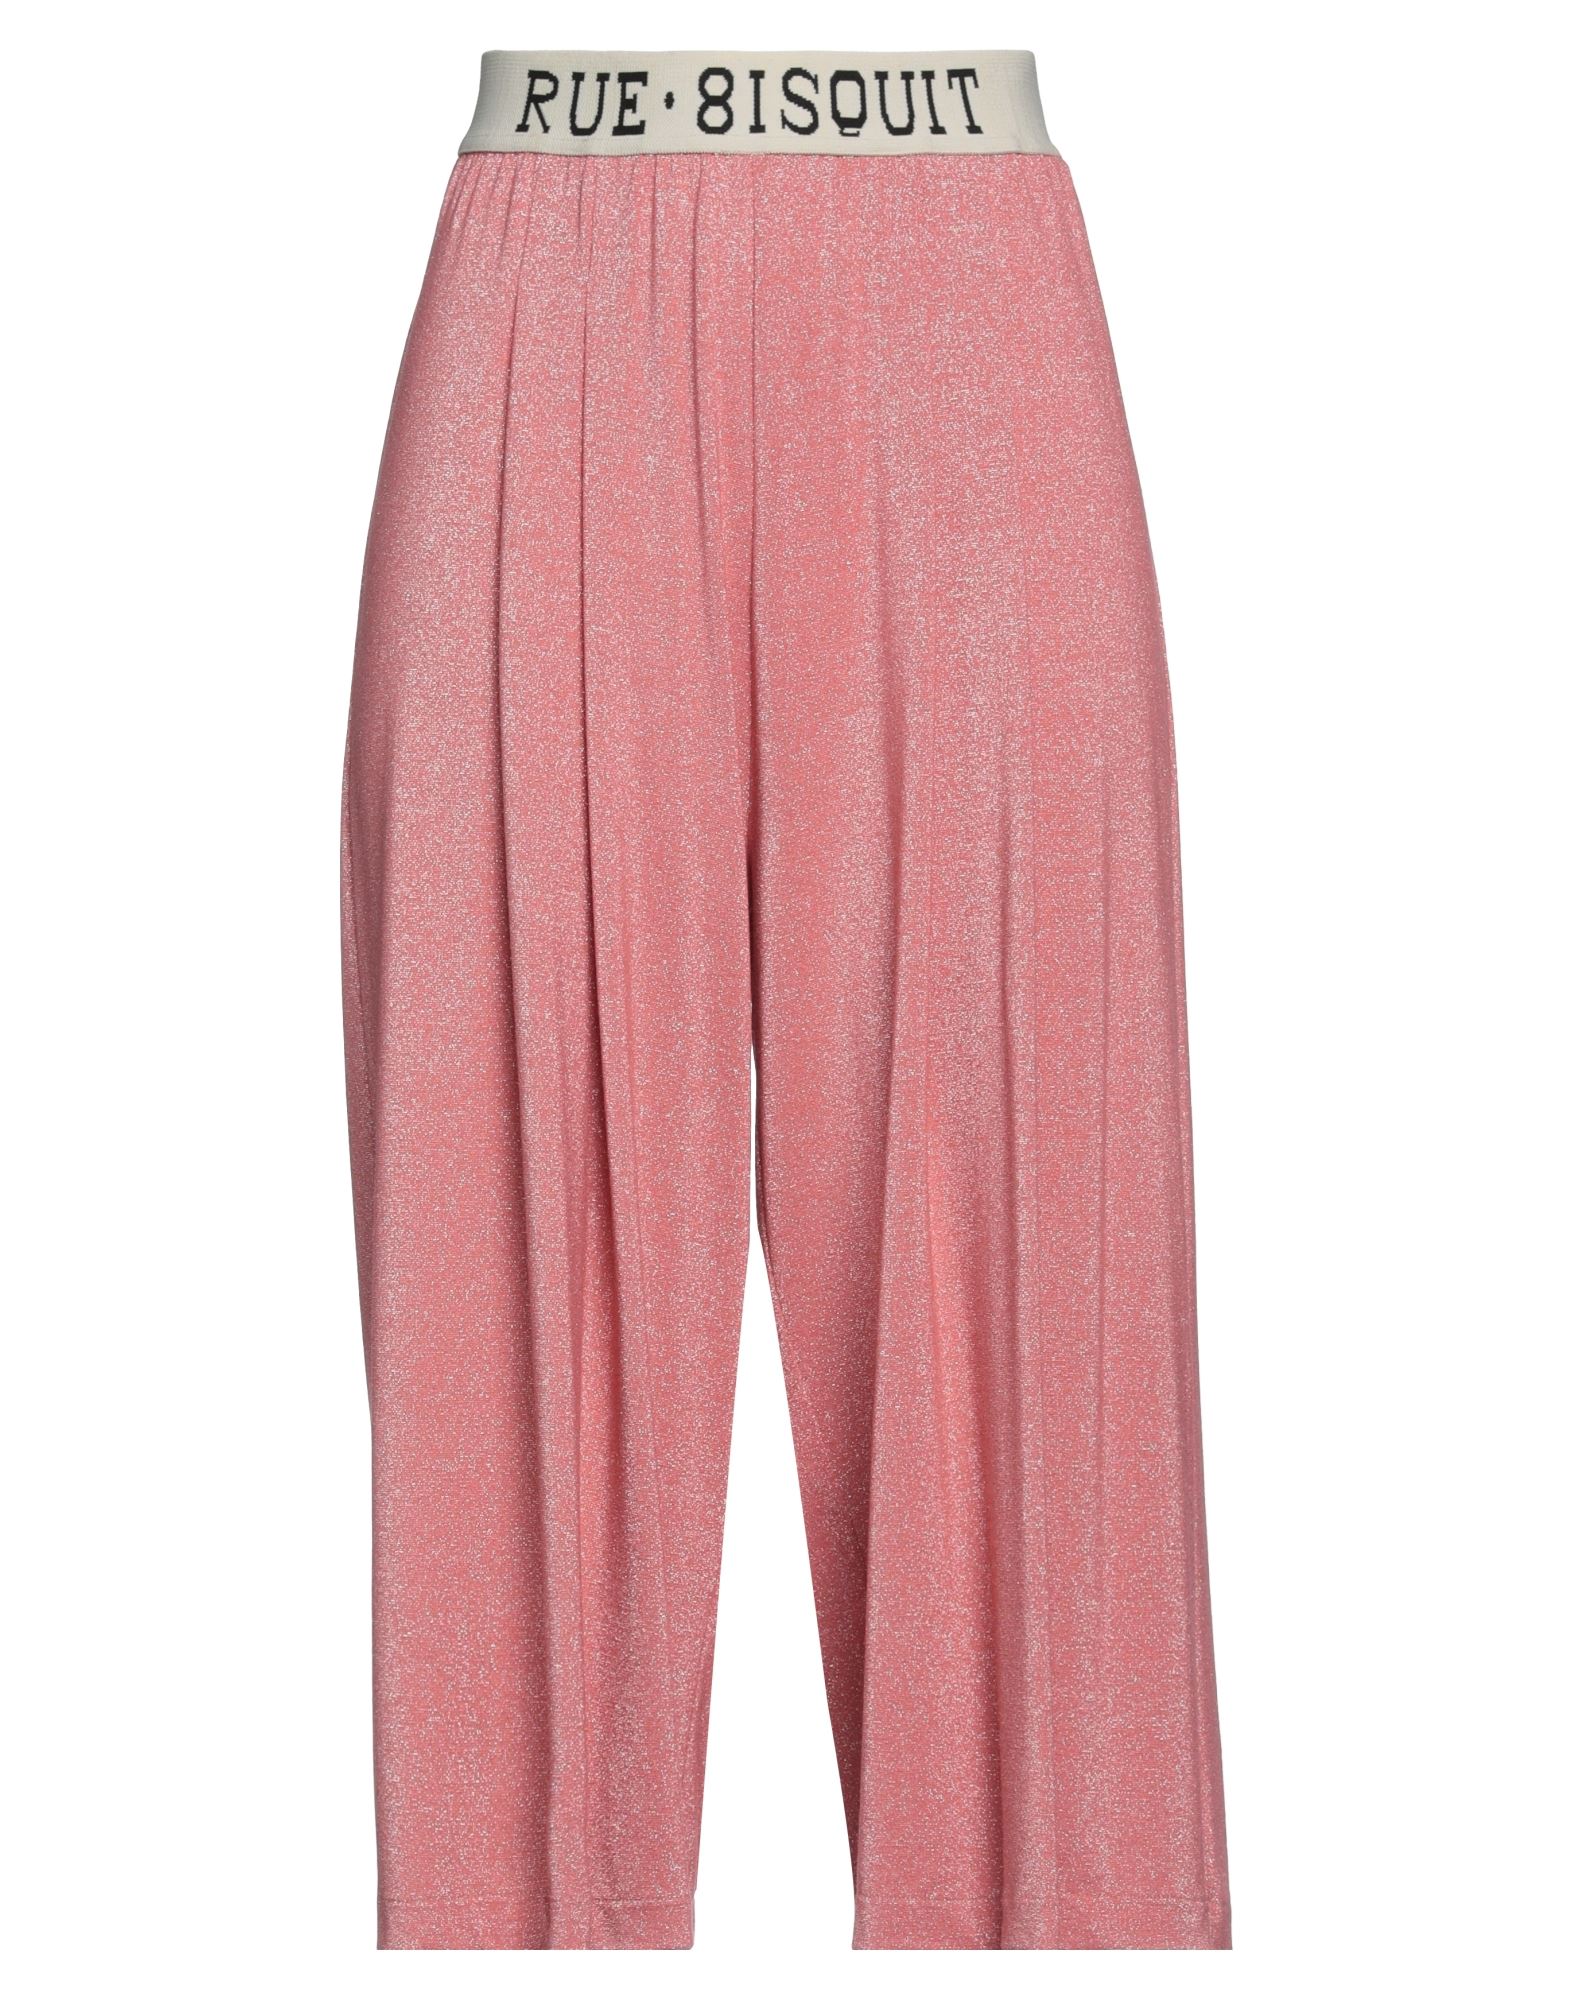 Rue 8isquit Cropped Pants In Pink